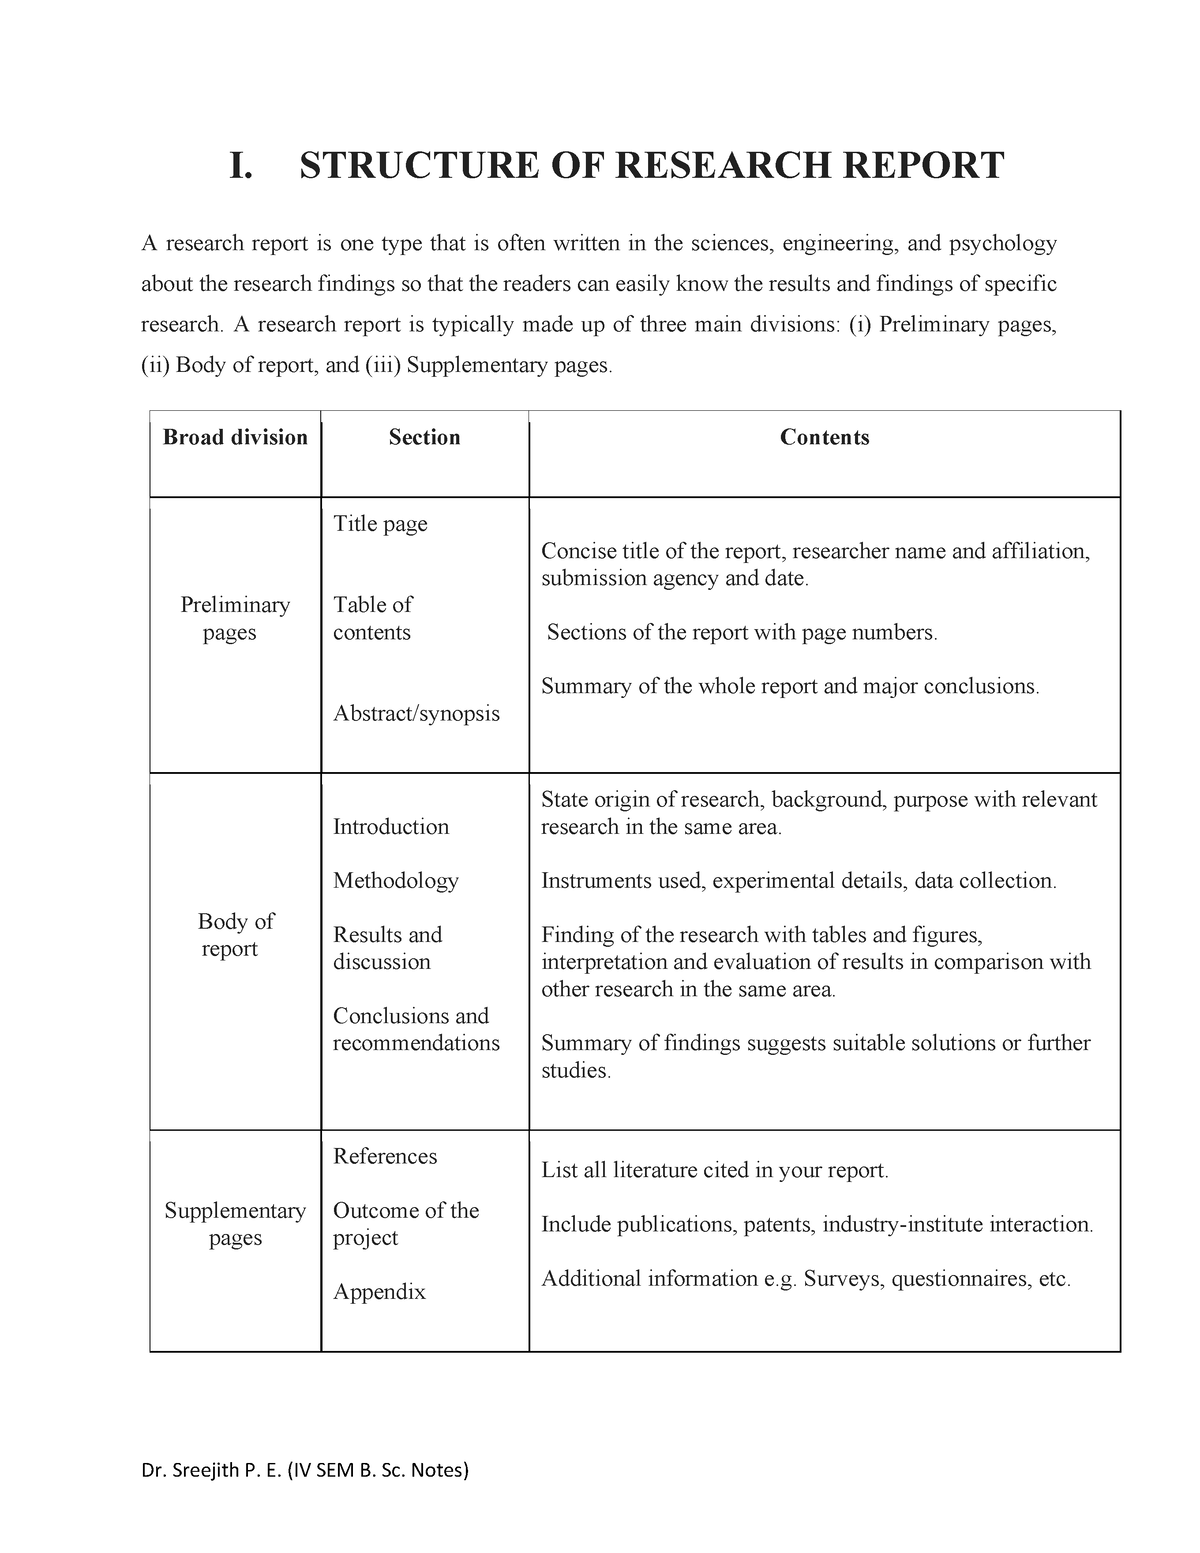 structure and components of research report pdf